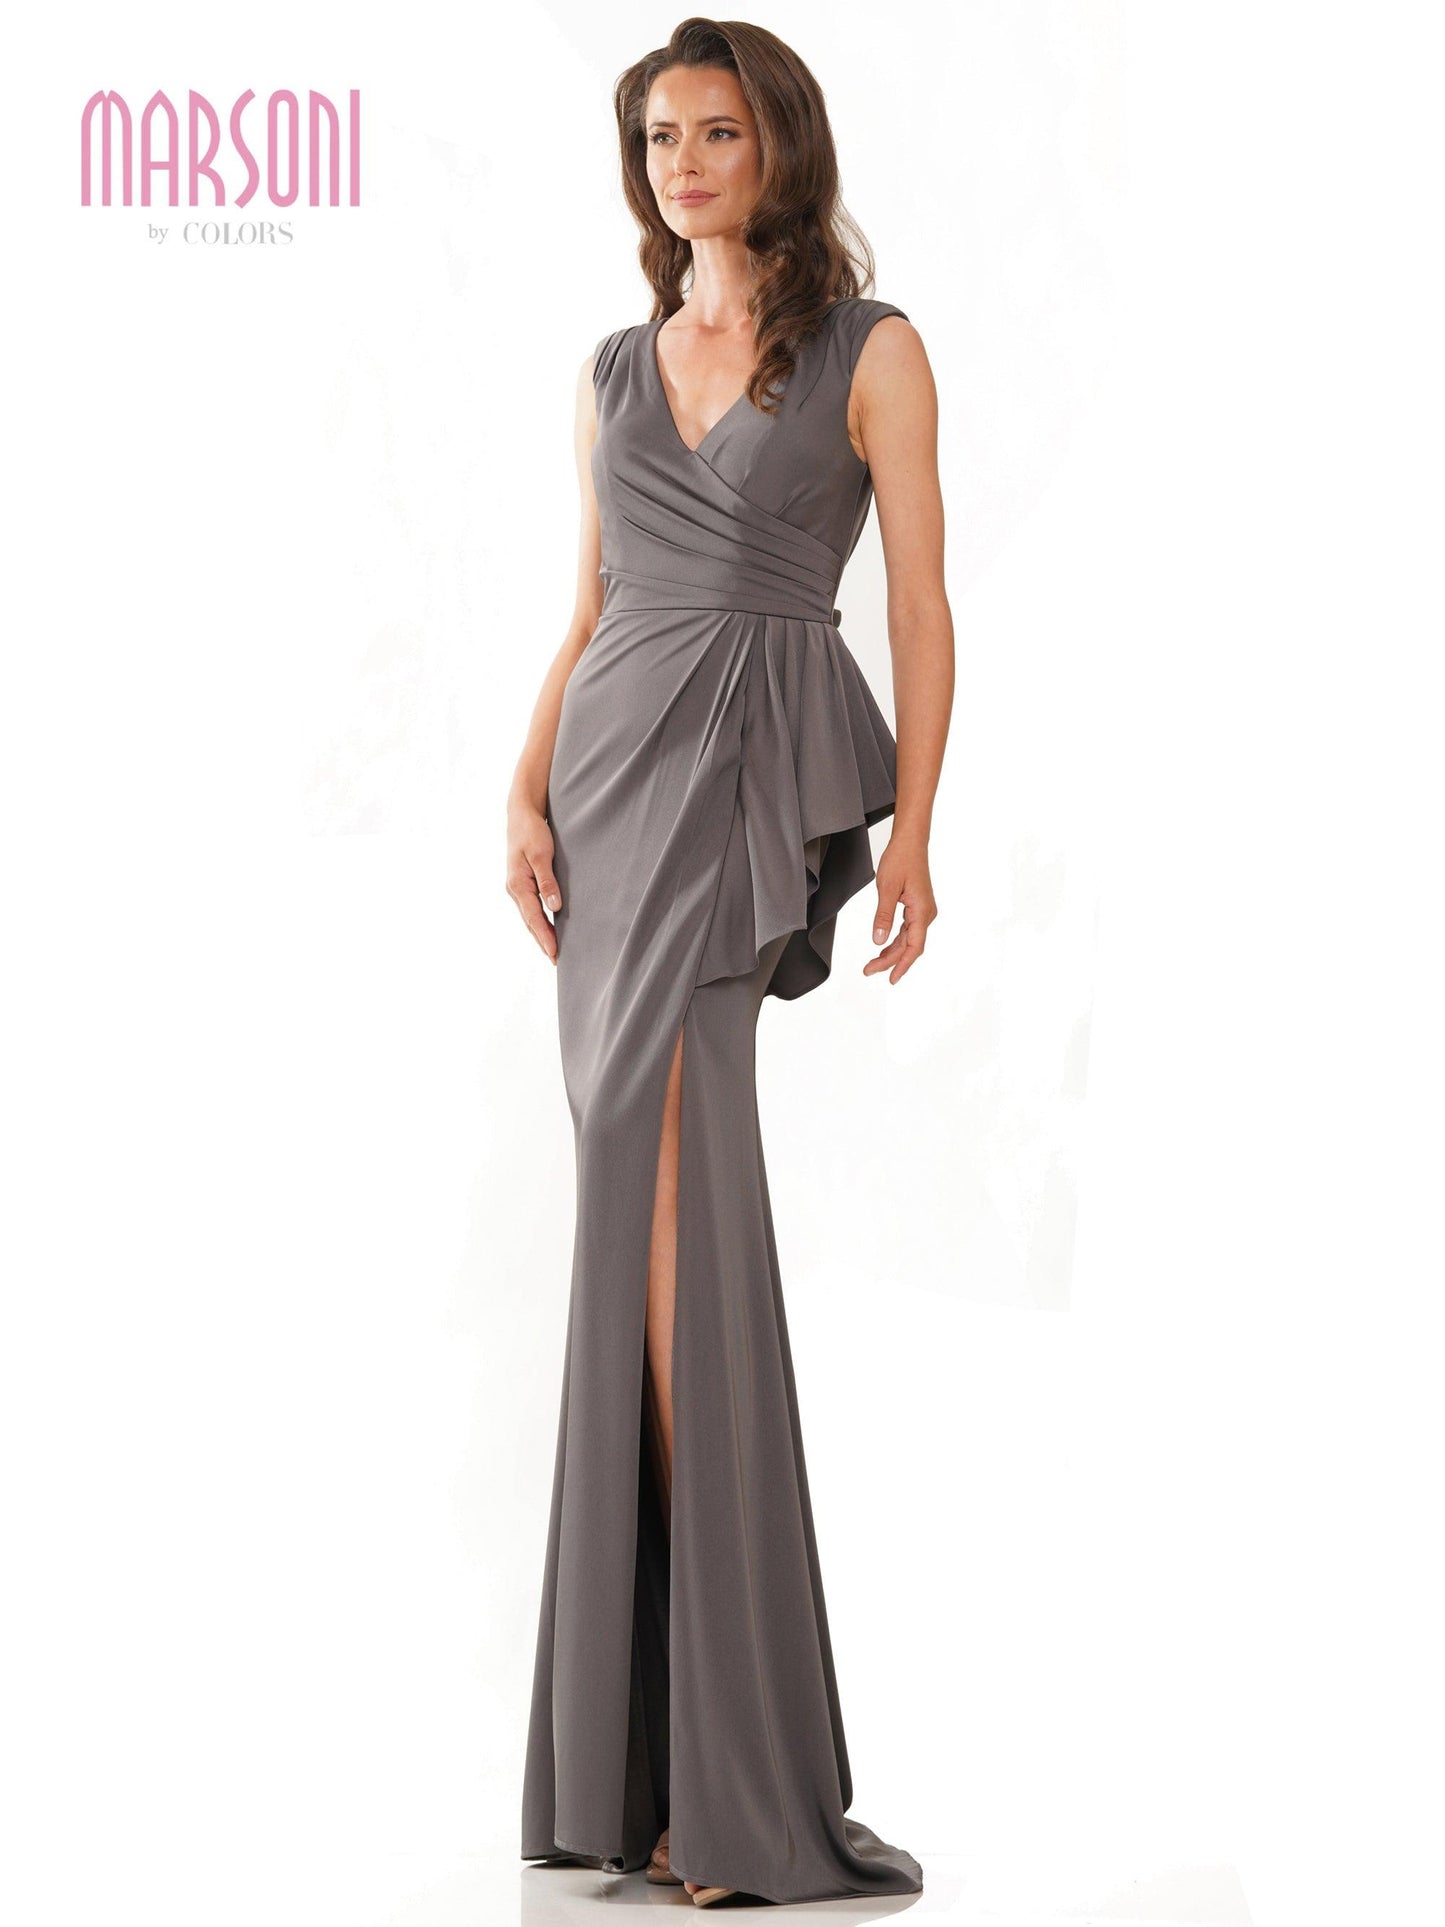 Marsoni Long Formal Mother of the Bride Gown 1227 - The Dress Outlet